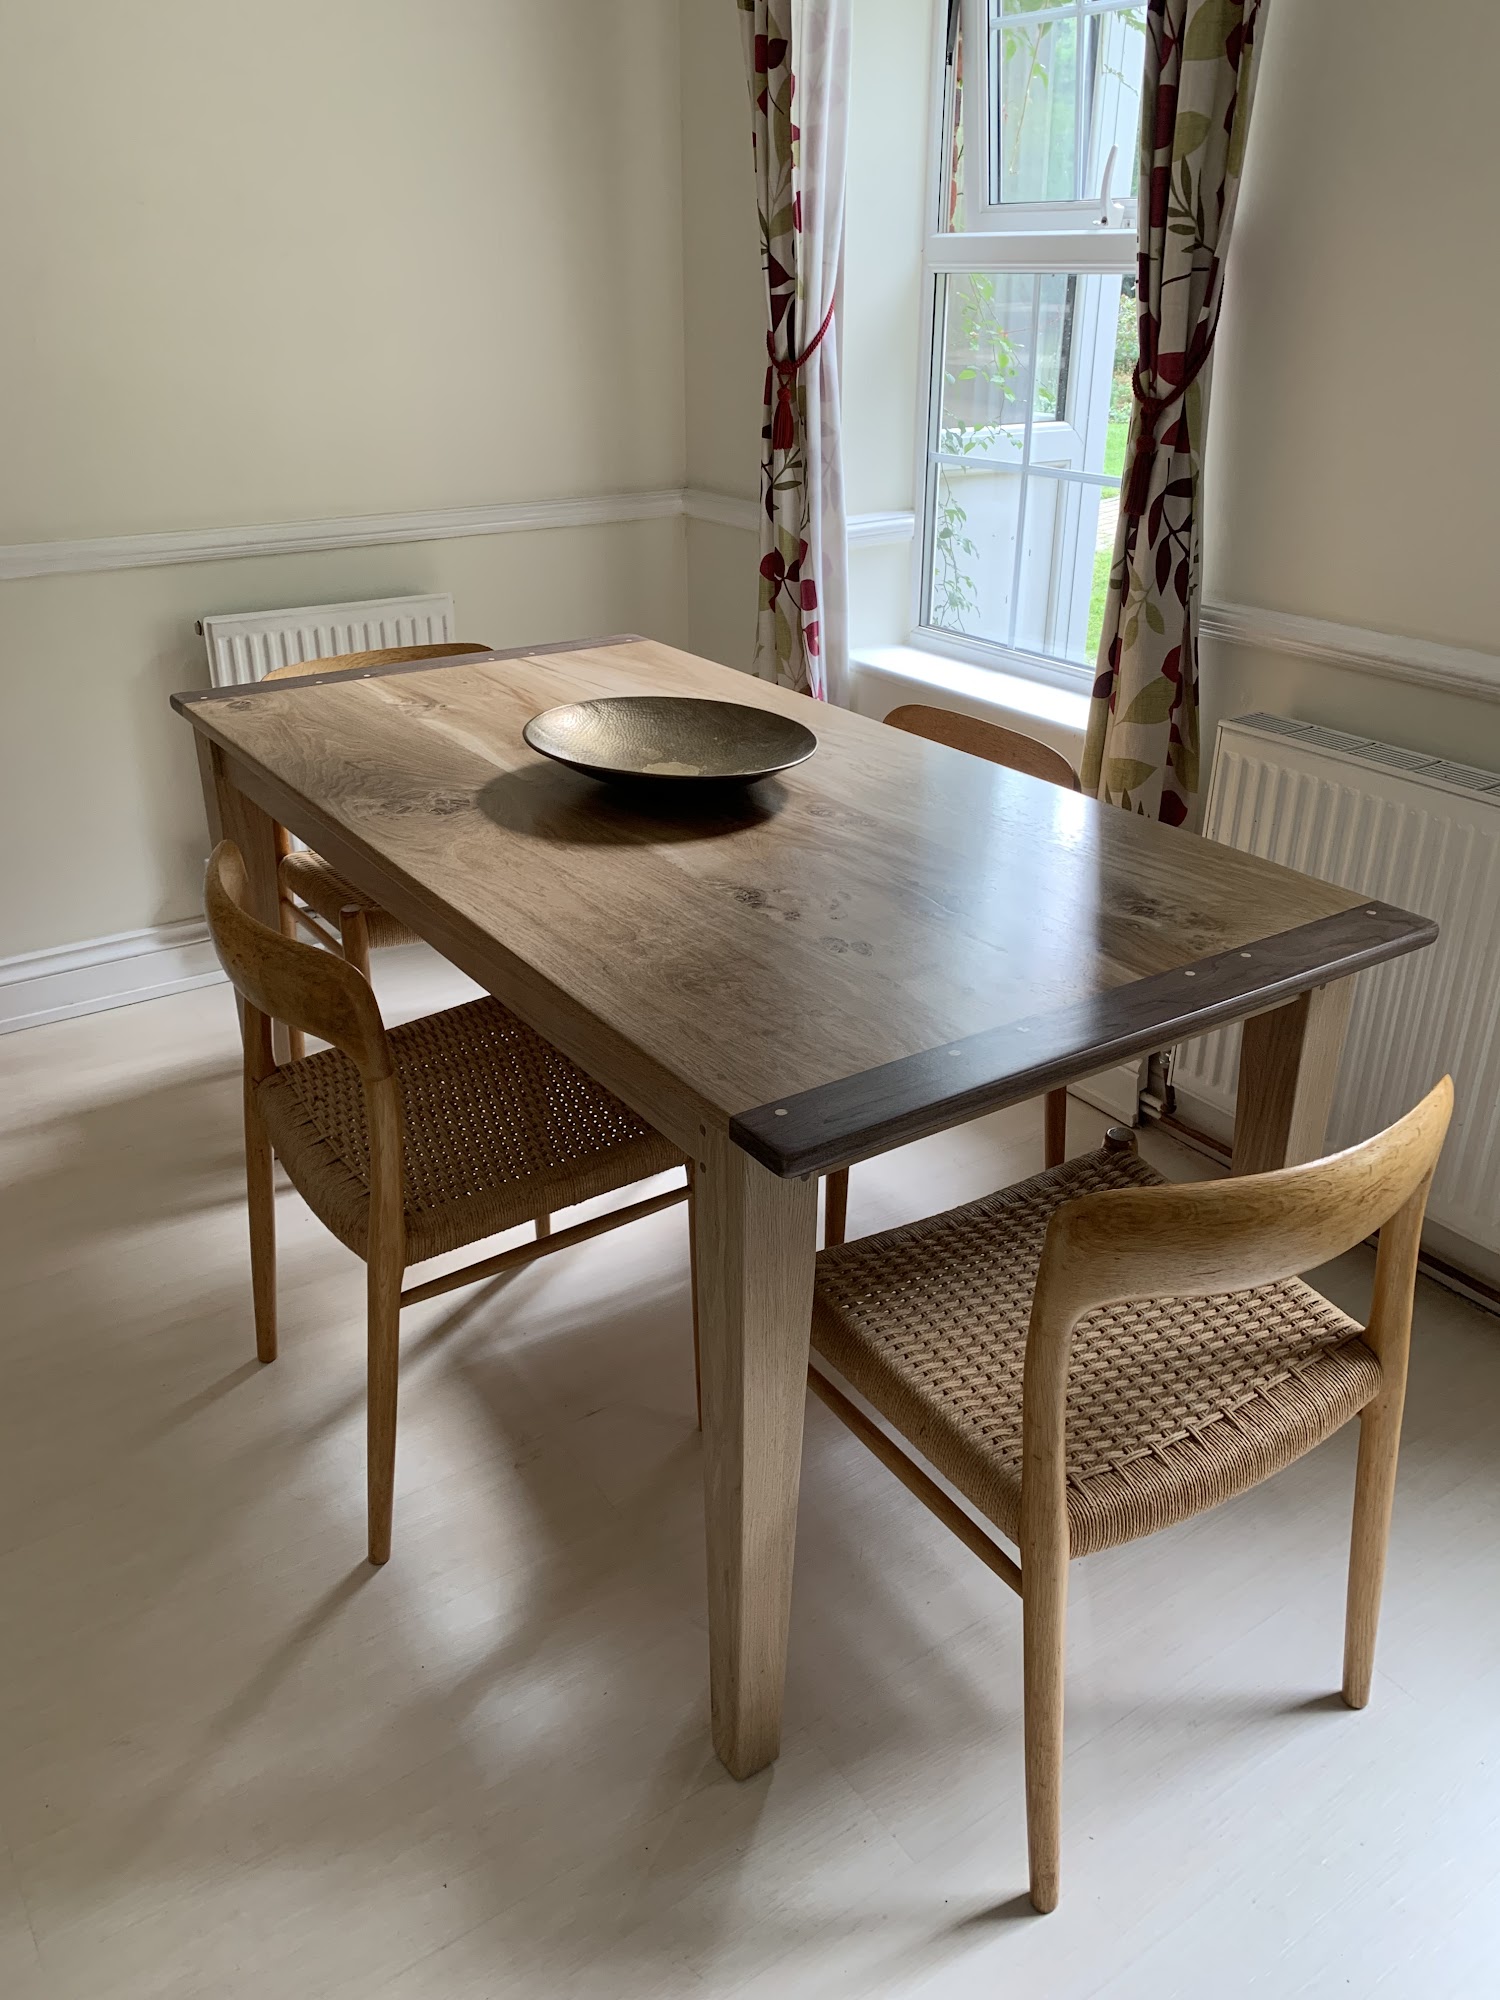 The Oak and Pine Barn - oak tables made to order